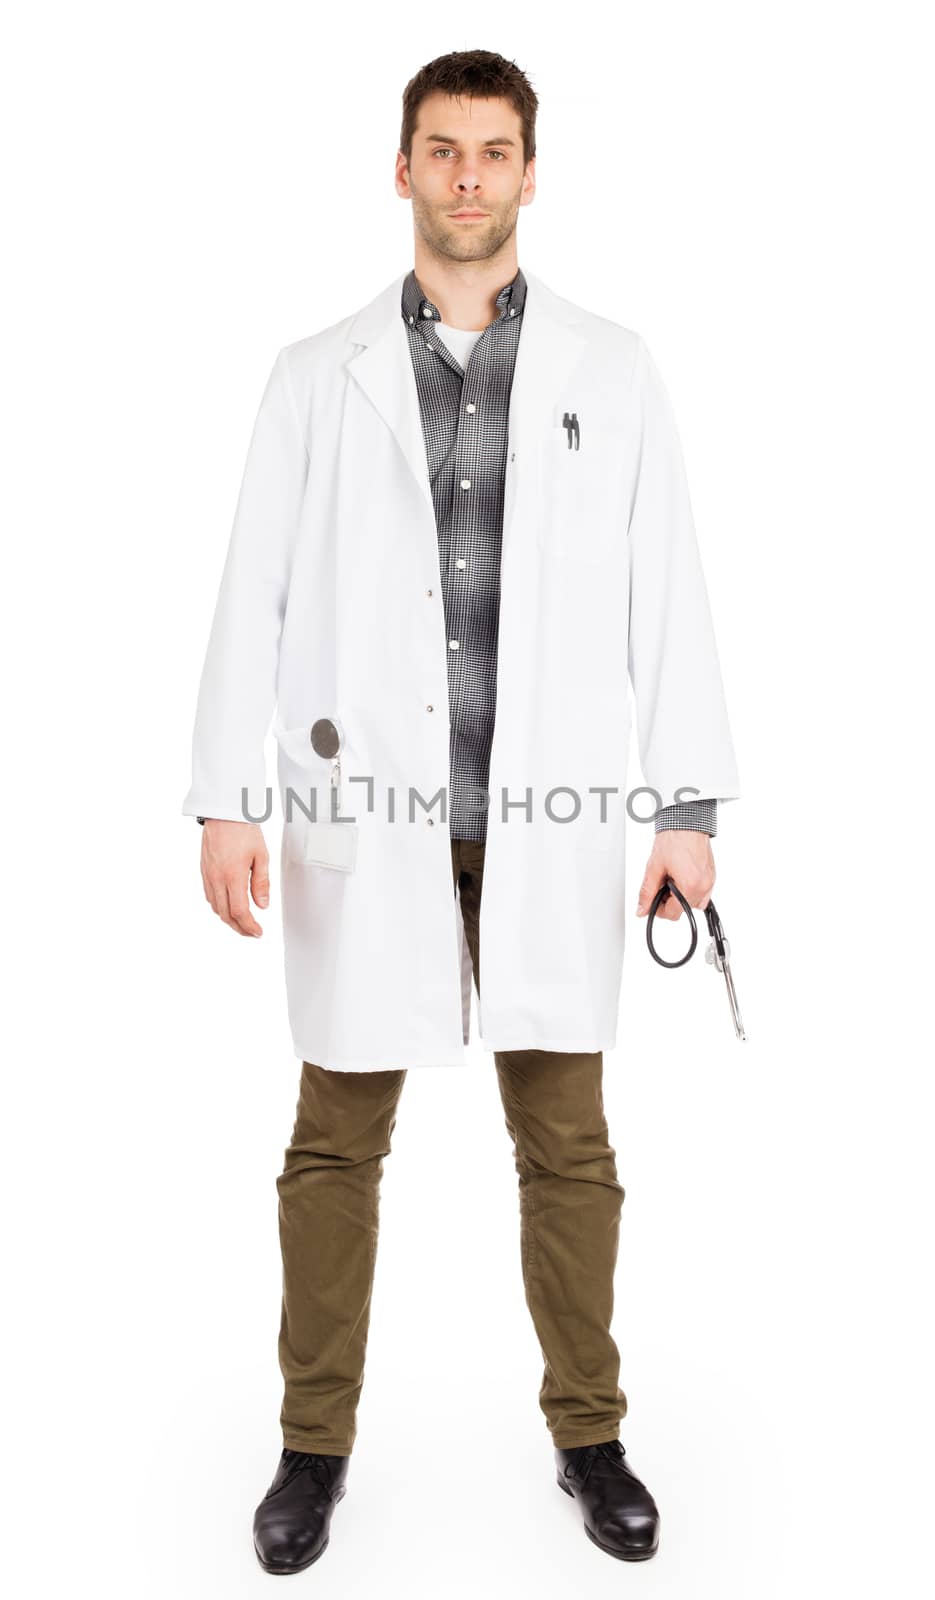 Male doctor, concept of healthcare and medicine by michaklootwijk